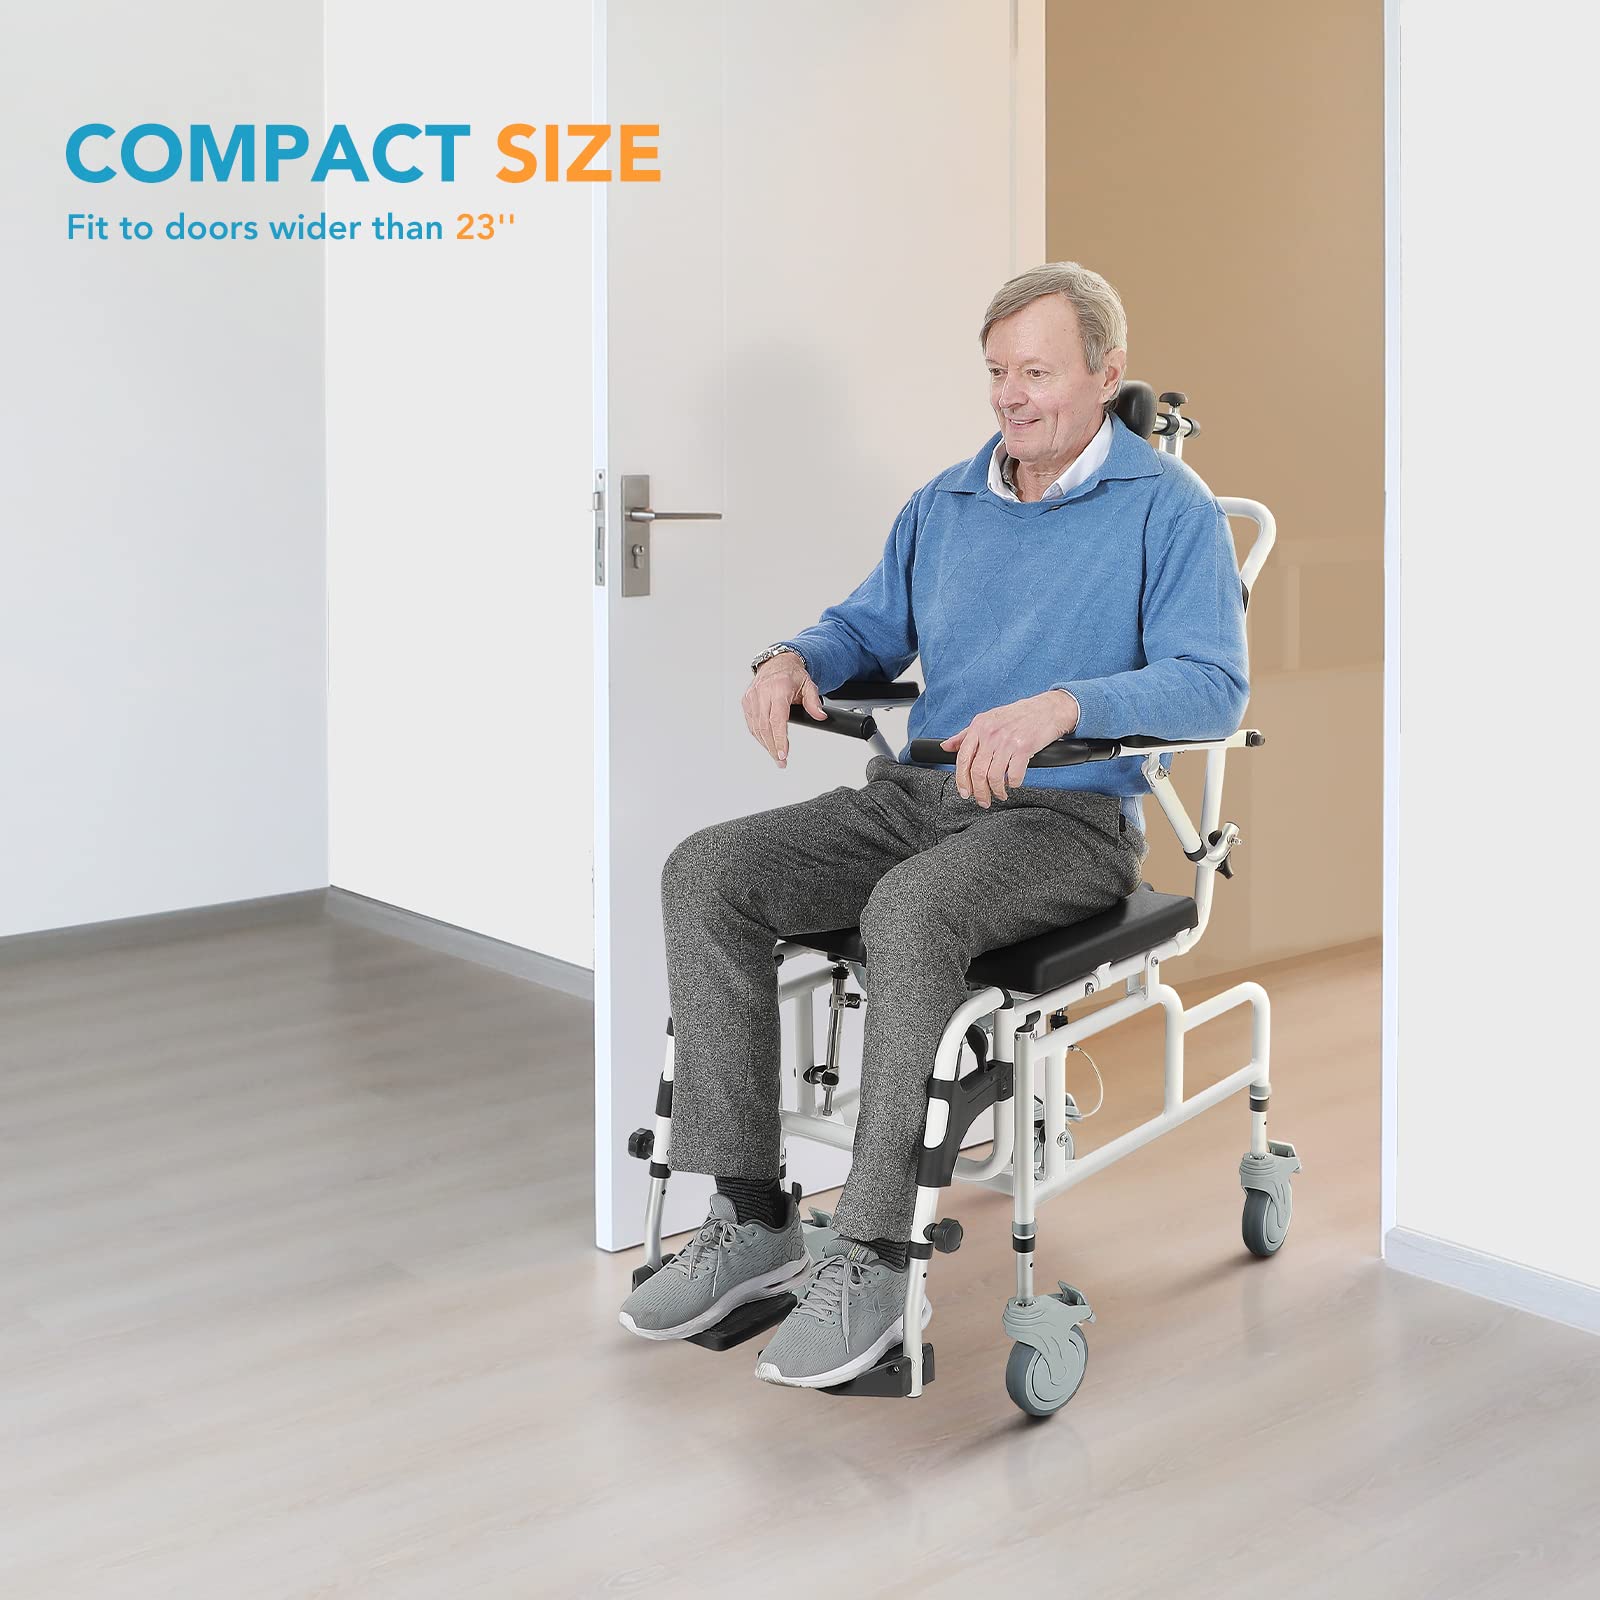 OasisSpace Personal Mobility Assist Bedside Commode Toilet Chair - Tilt Shower Commode Wheelchair, 4-in-1 Shampoo Chair with 30° Reclining and Headrest, Adjustable Transport Rolling Chair